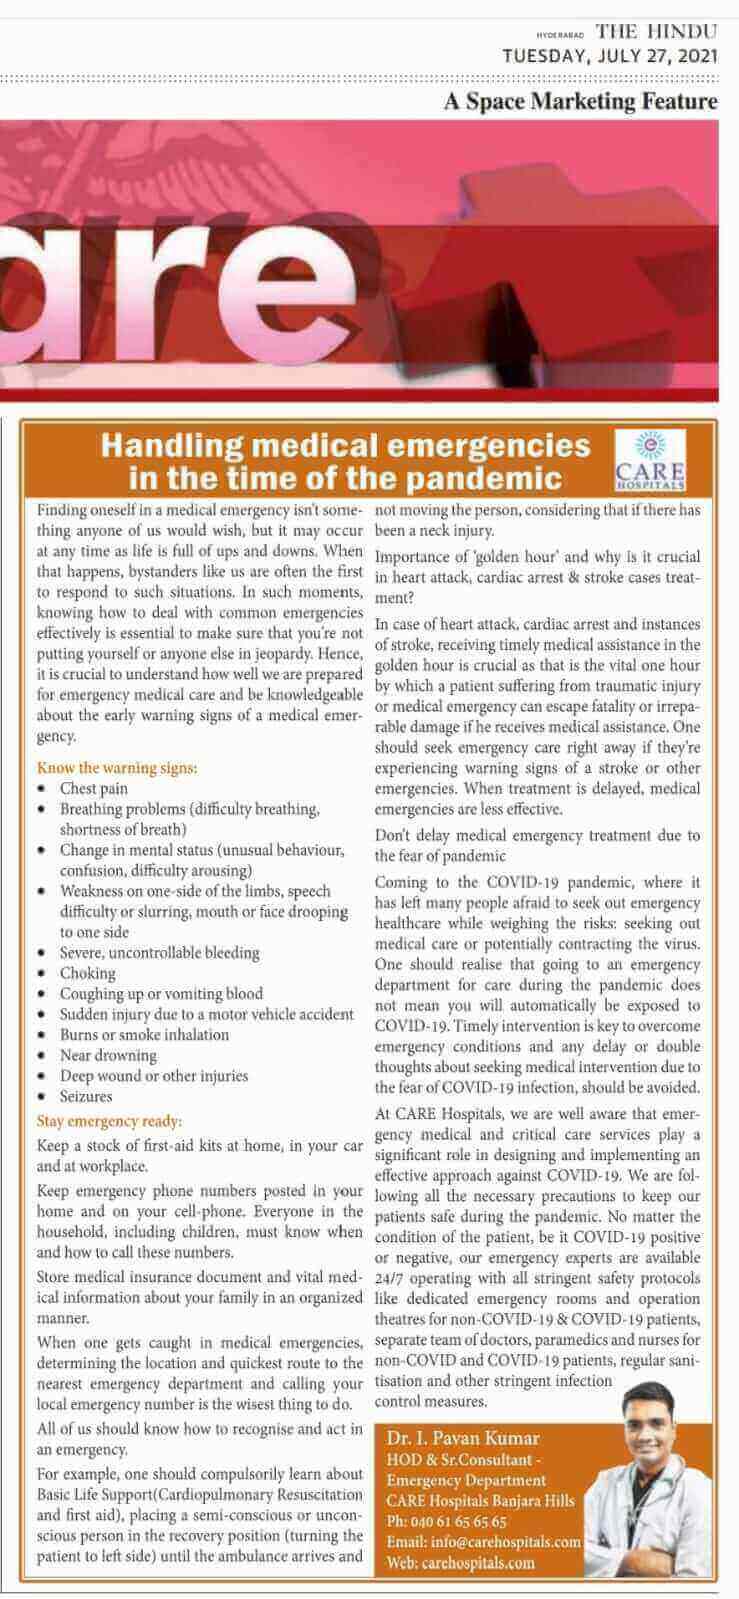 Handling Medical Emergencies in the time of the pandemic article by  Dr. I. Pavan Kumar - Consultant Emergency Medicine